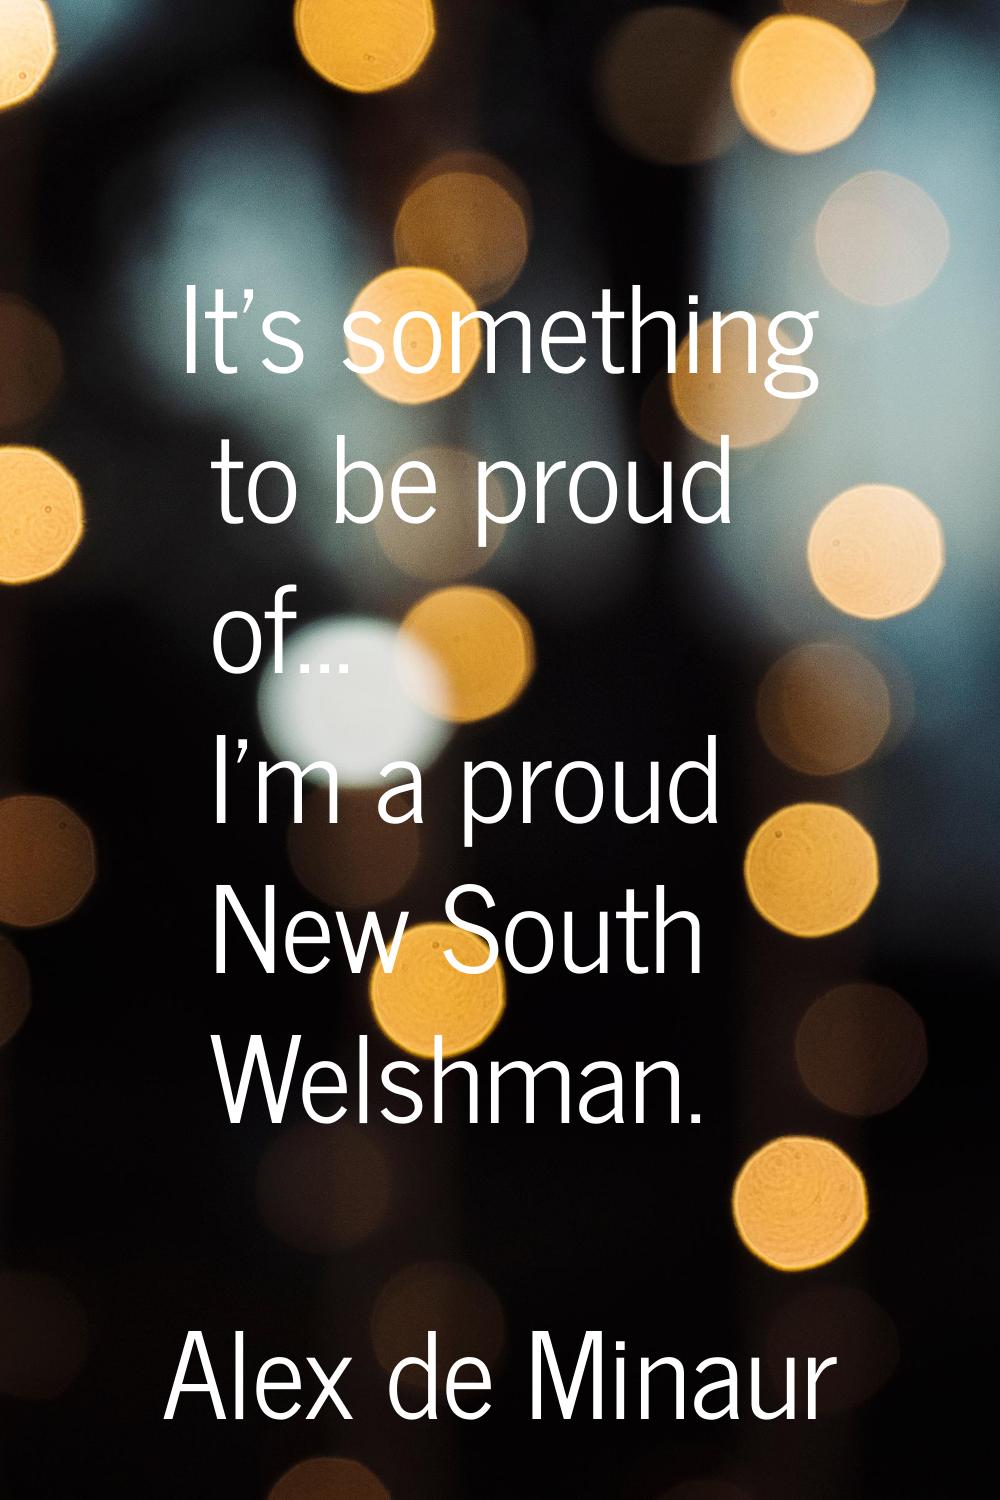 It's something to be proud of... I'm a proud New South Welshman.